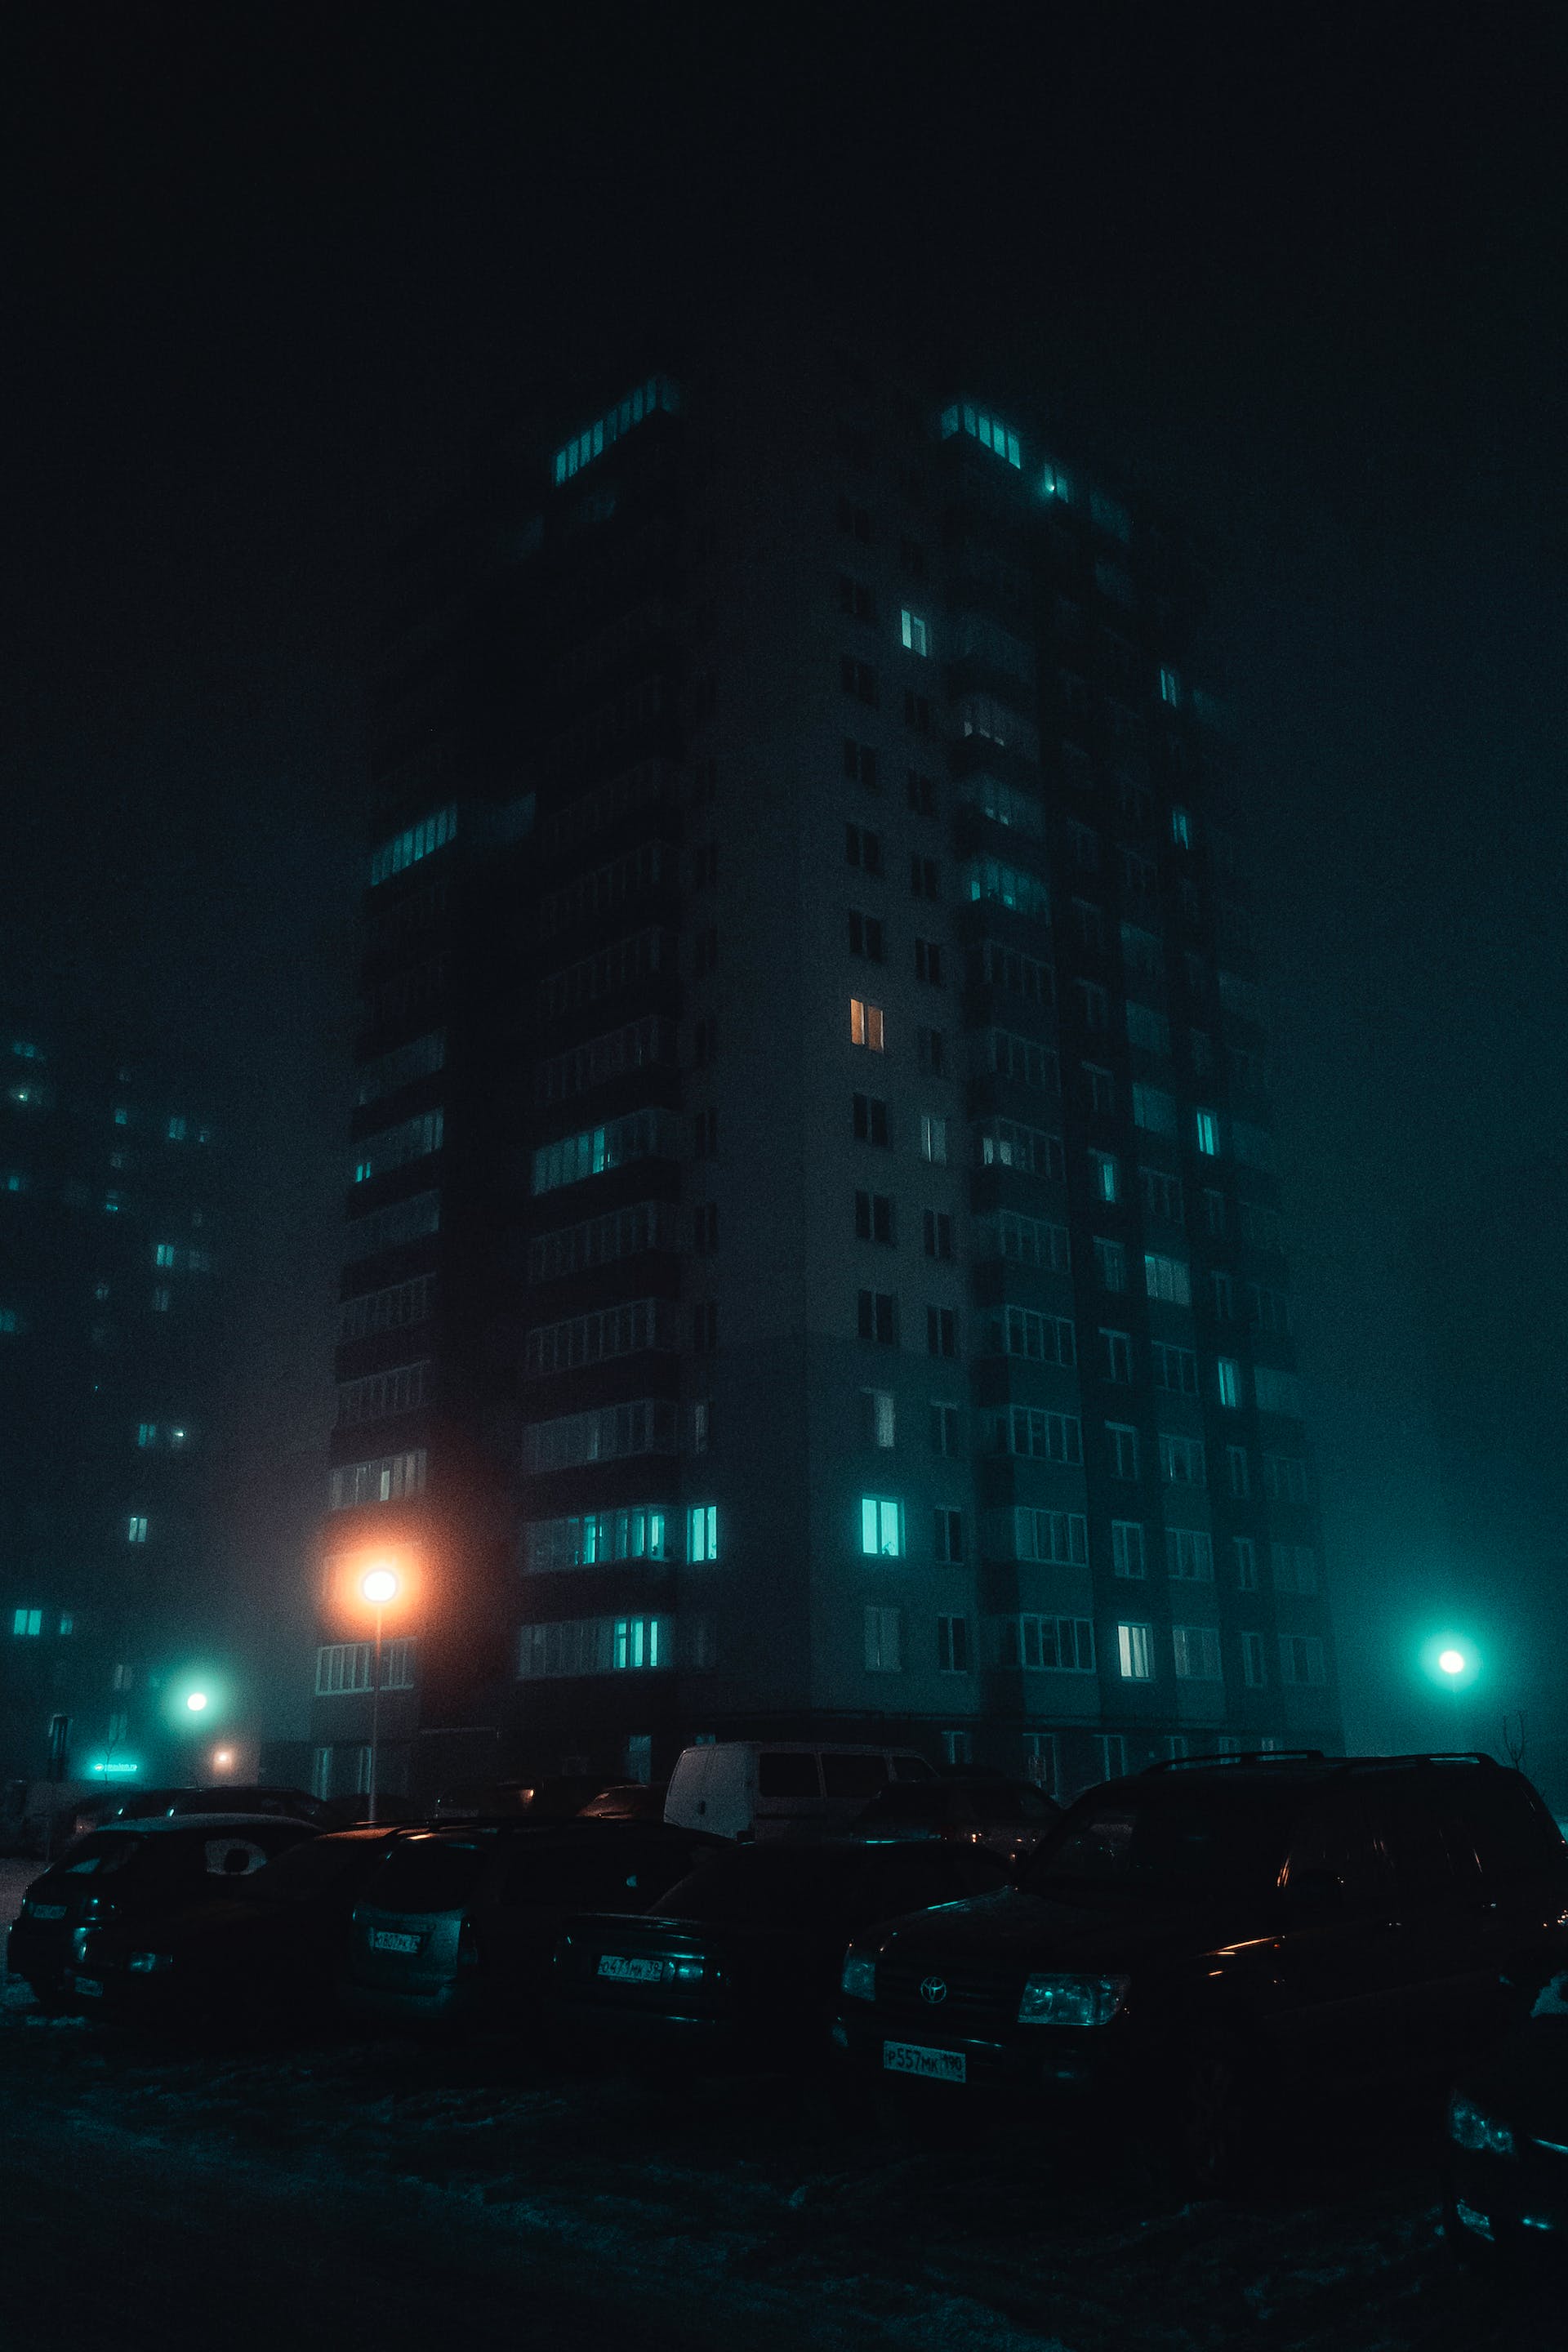 Cars parked near a building | Source: Pexels